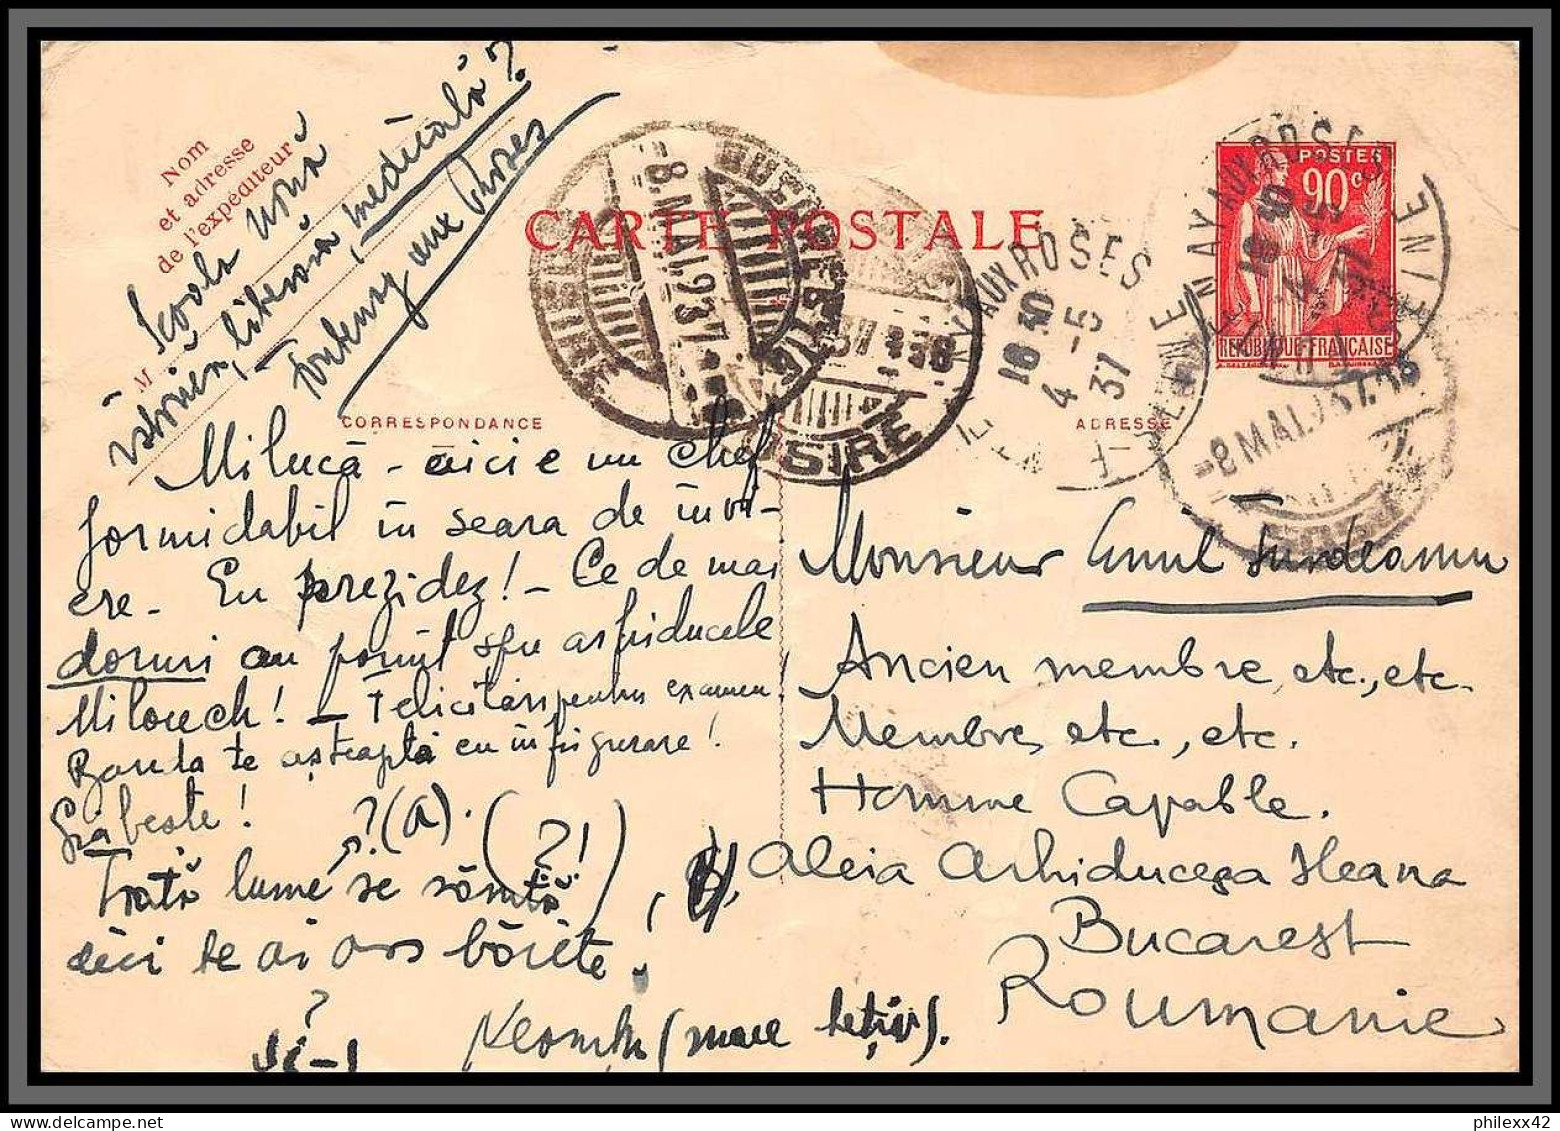 10500 Paix 90c Rouge Fontenay-aux-Roses Pour Bucarest Roumanie 1937 Carte Postale Entier Postal Stationery France  - Standard Postcards & Stamped On Demand (before 1995)